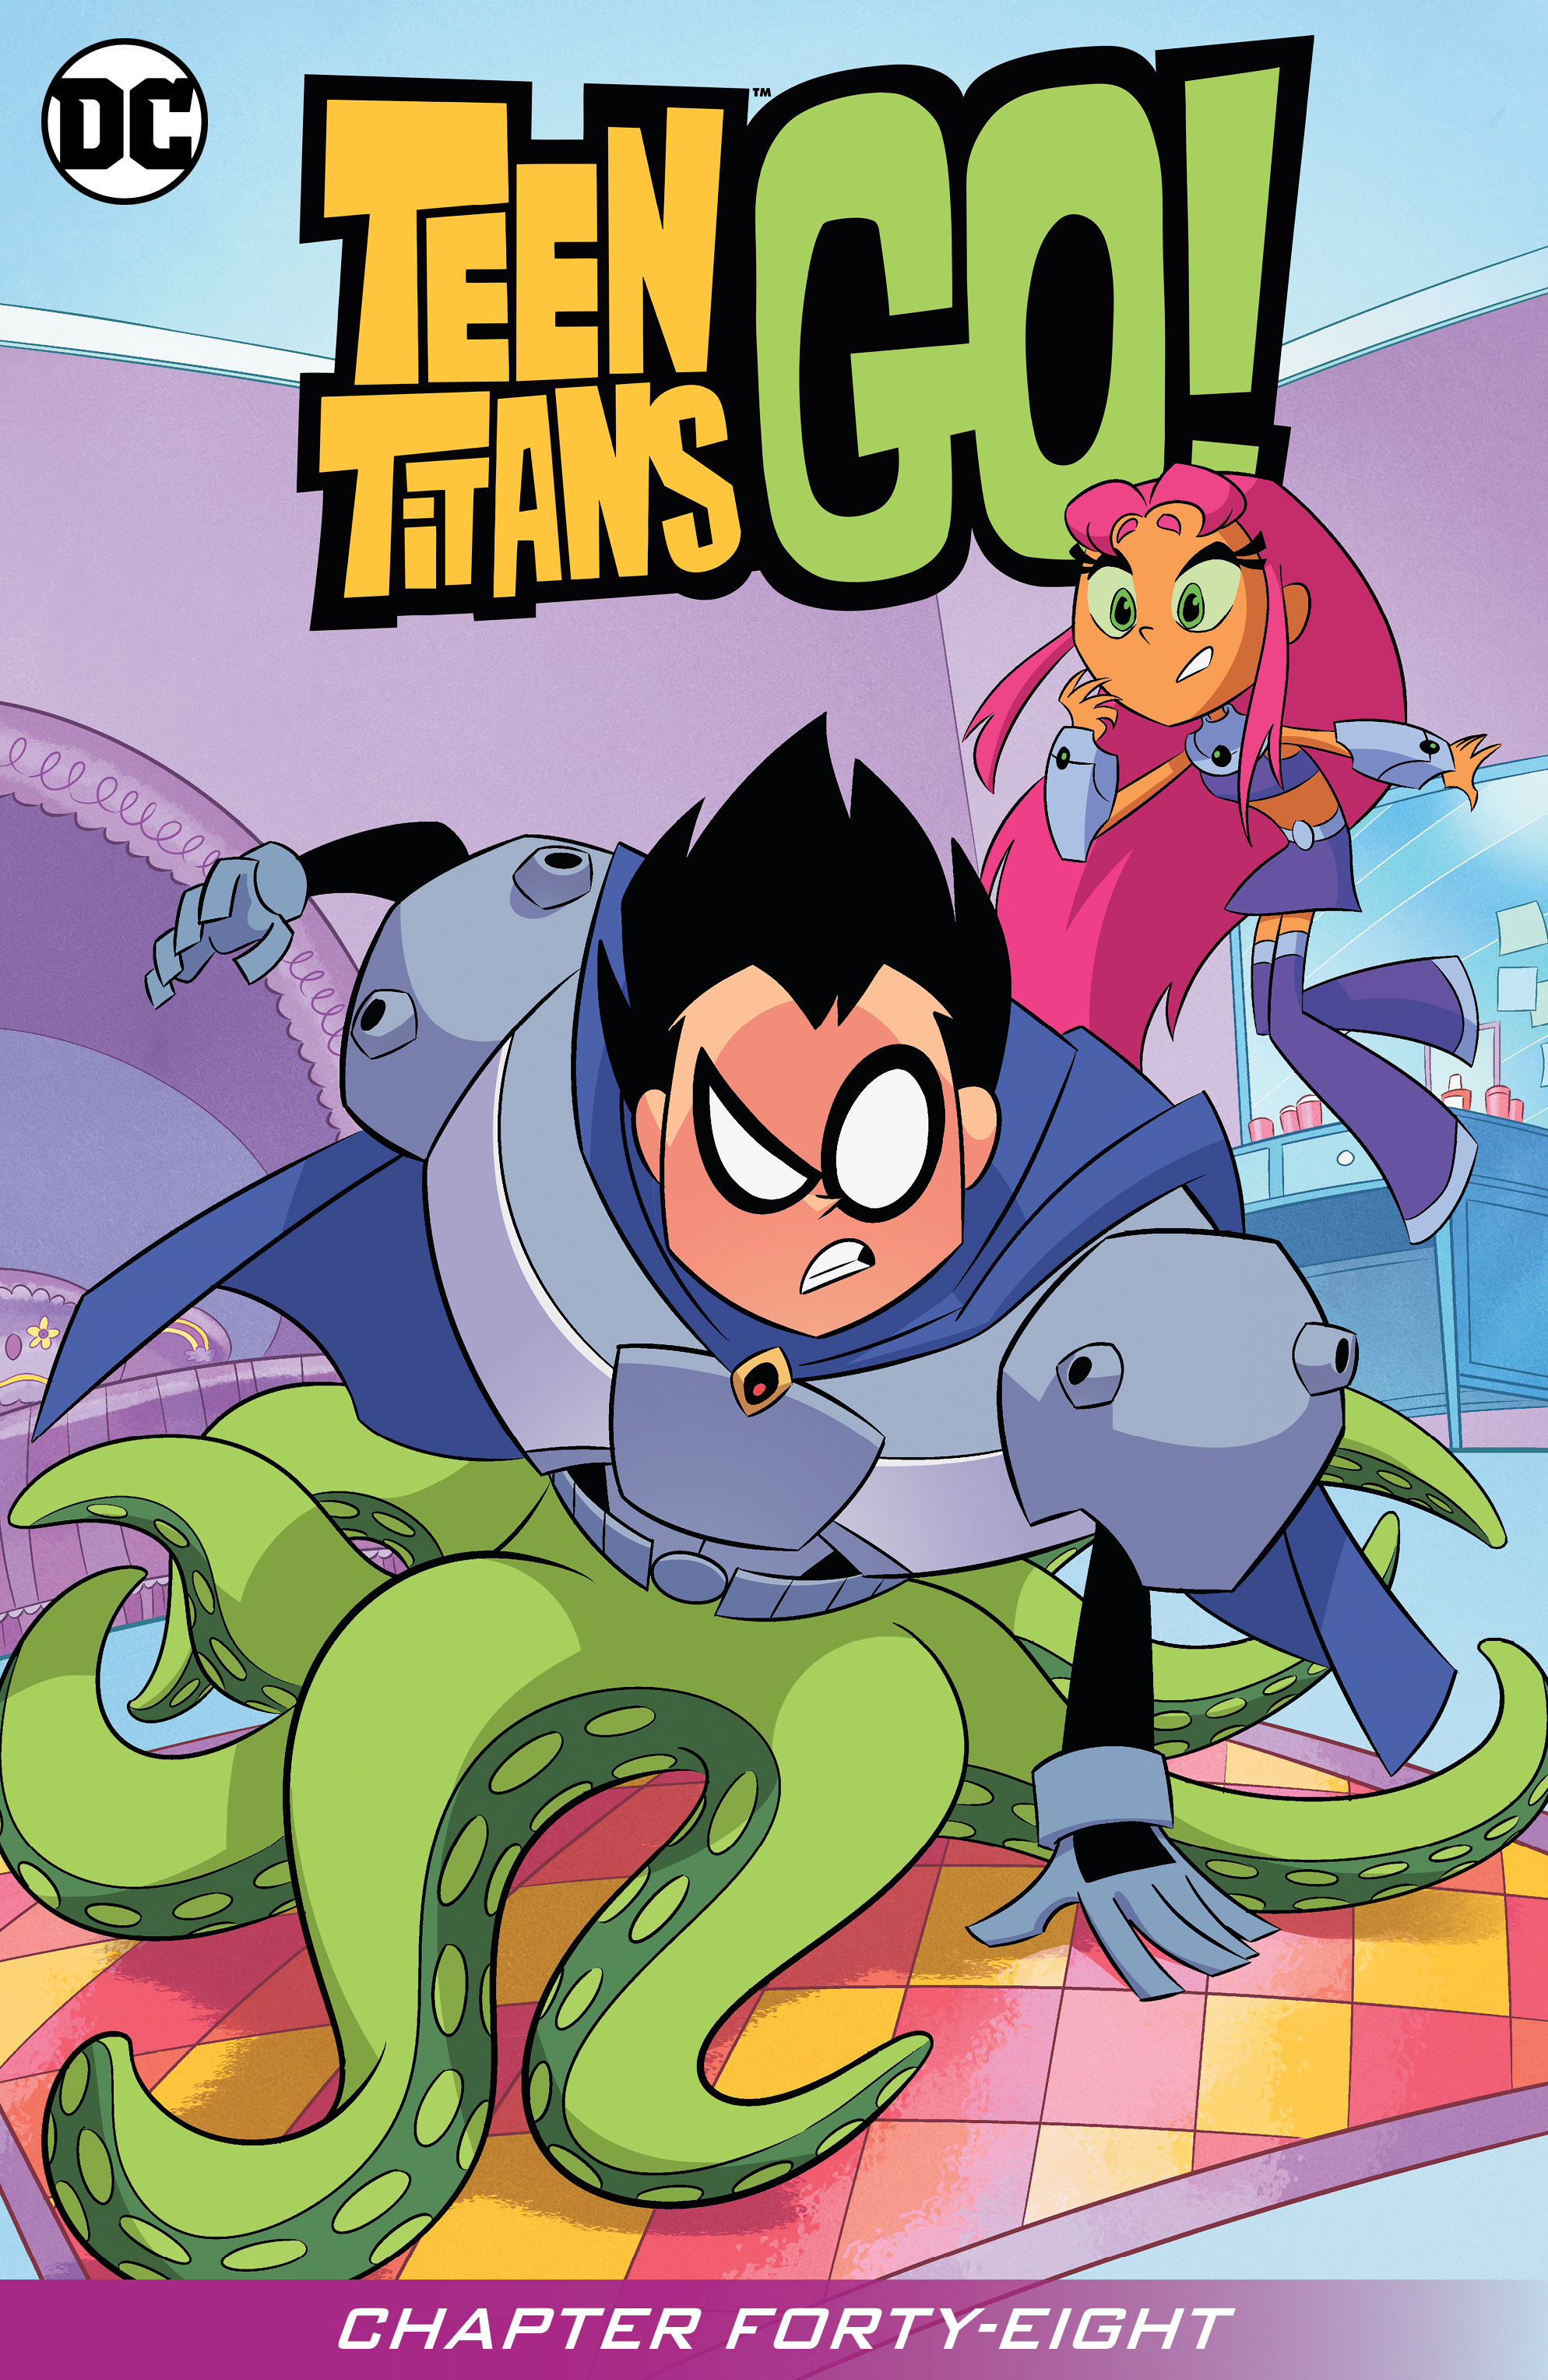 Teen Titans Go! (2013-) #48 preview images